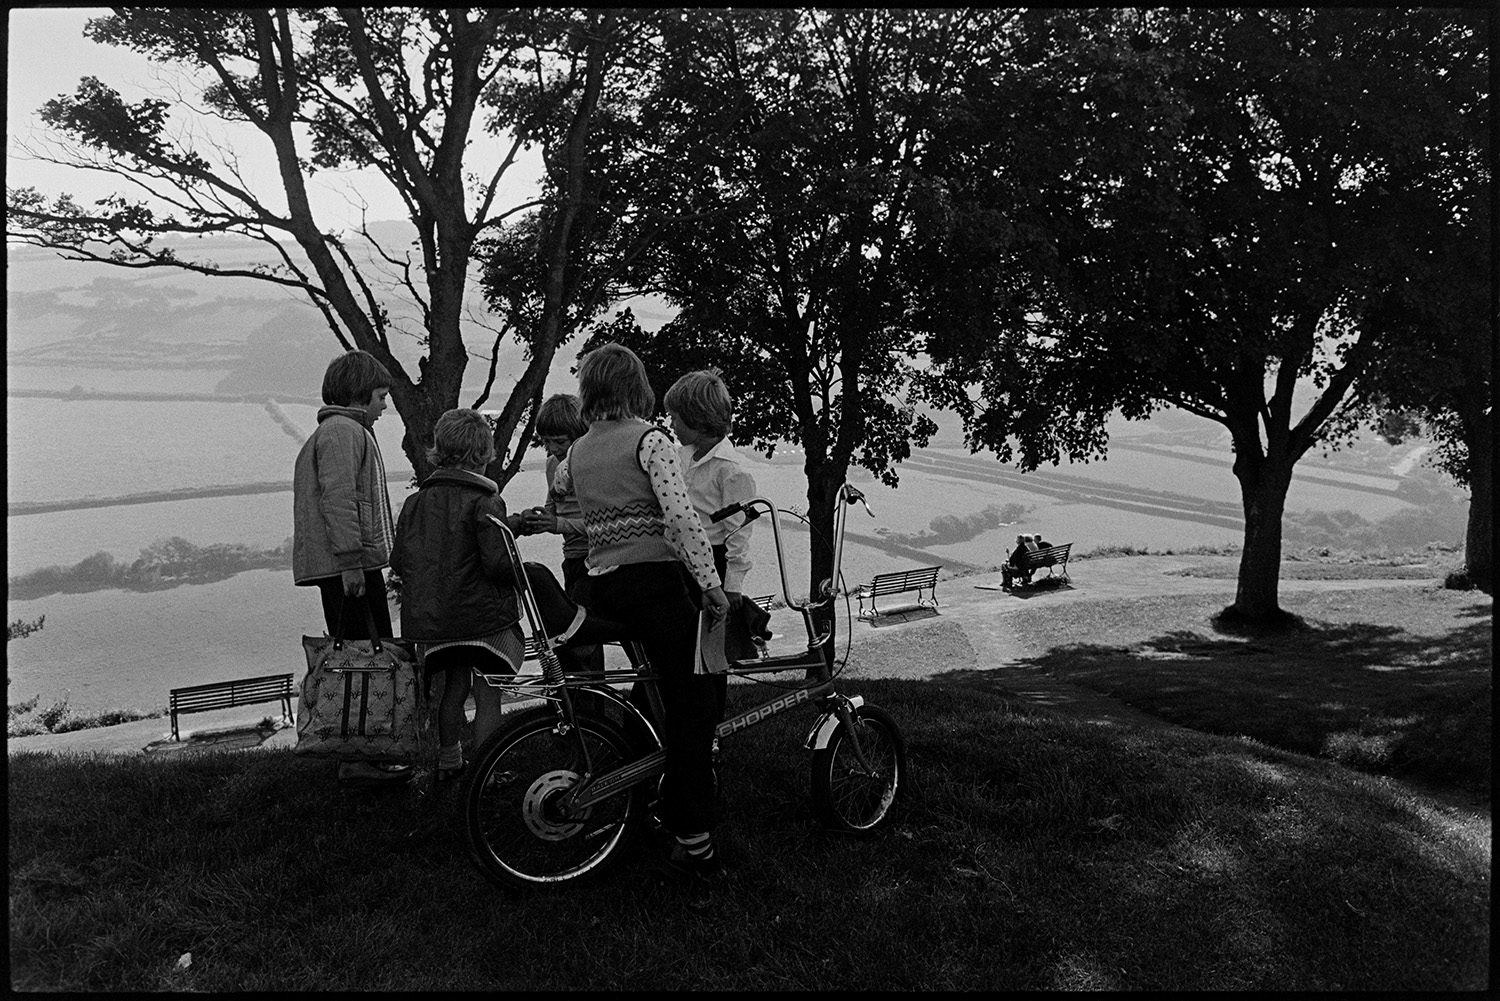 People and children enjoying park and fine view, bicycles. 
[Children playing in a park at Torrington, looking out over views of the valley below with fields and hedges. One of the boys is on a chopper bicycle. In the background people are sat on a bench looking at the view below.]